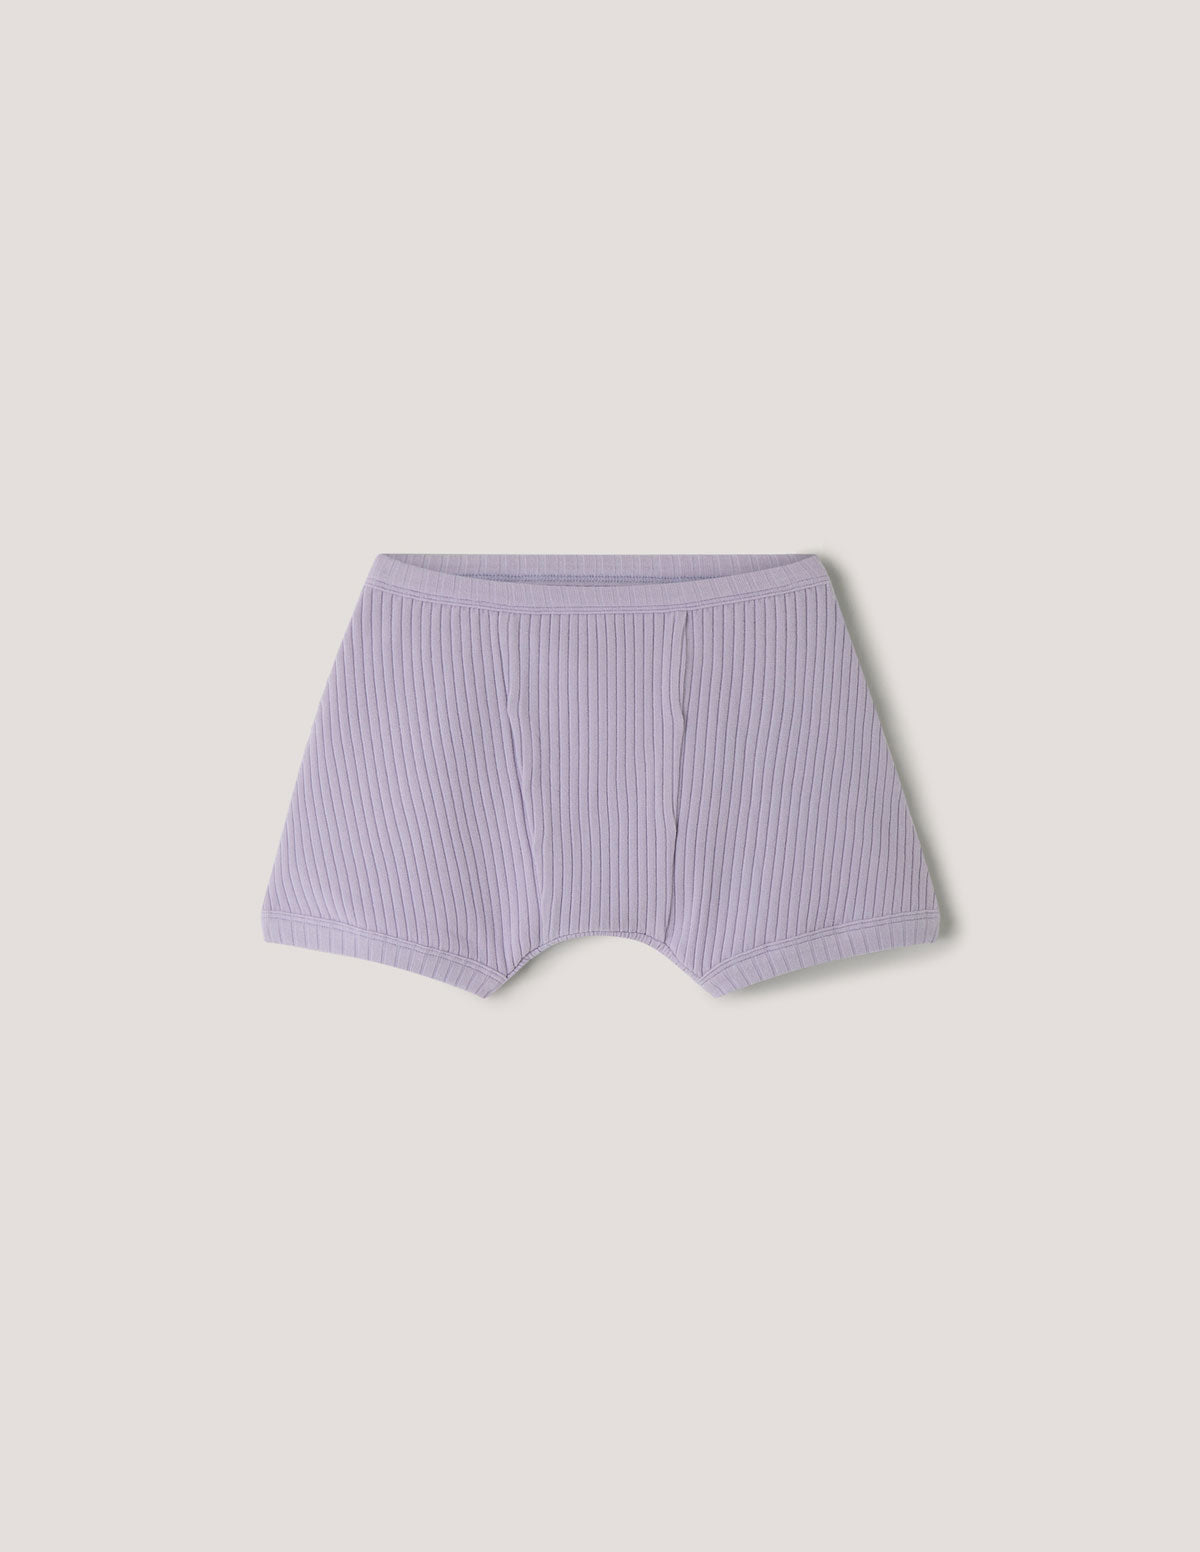 youth - the comfy boy short - lavender